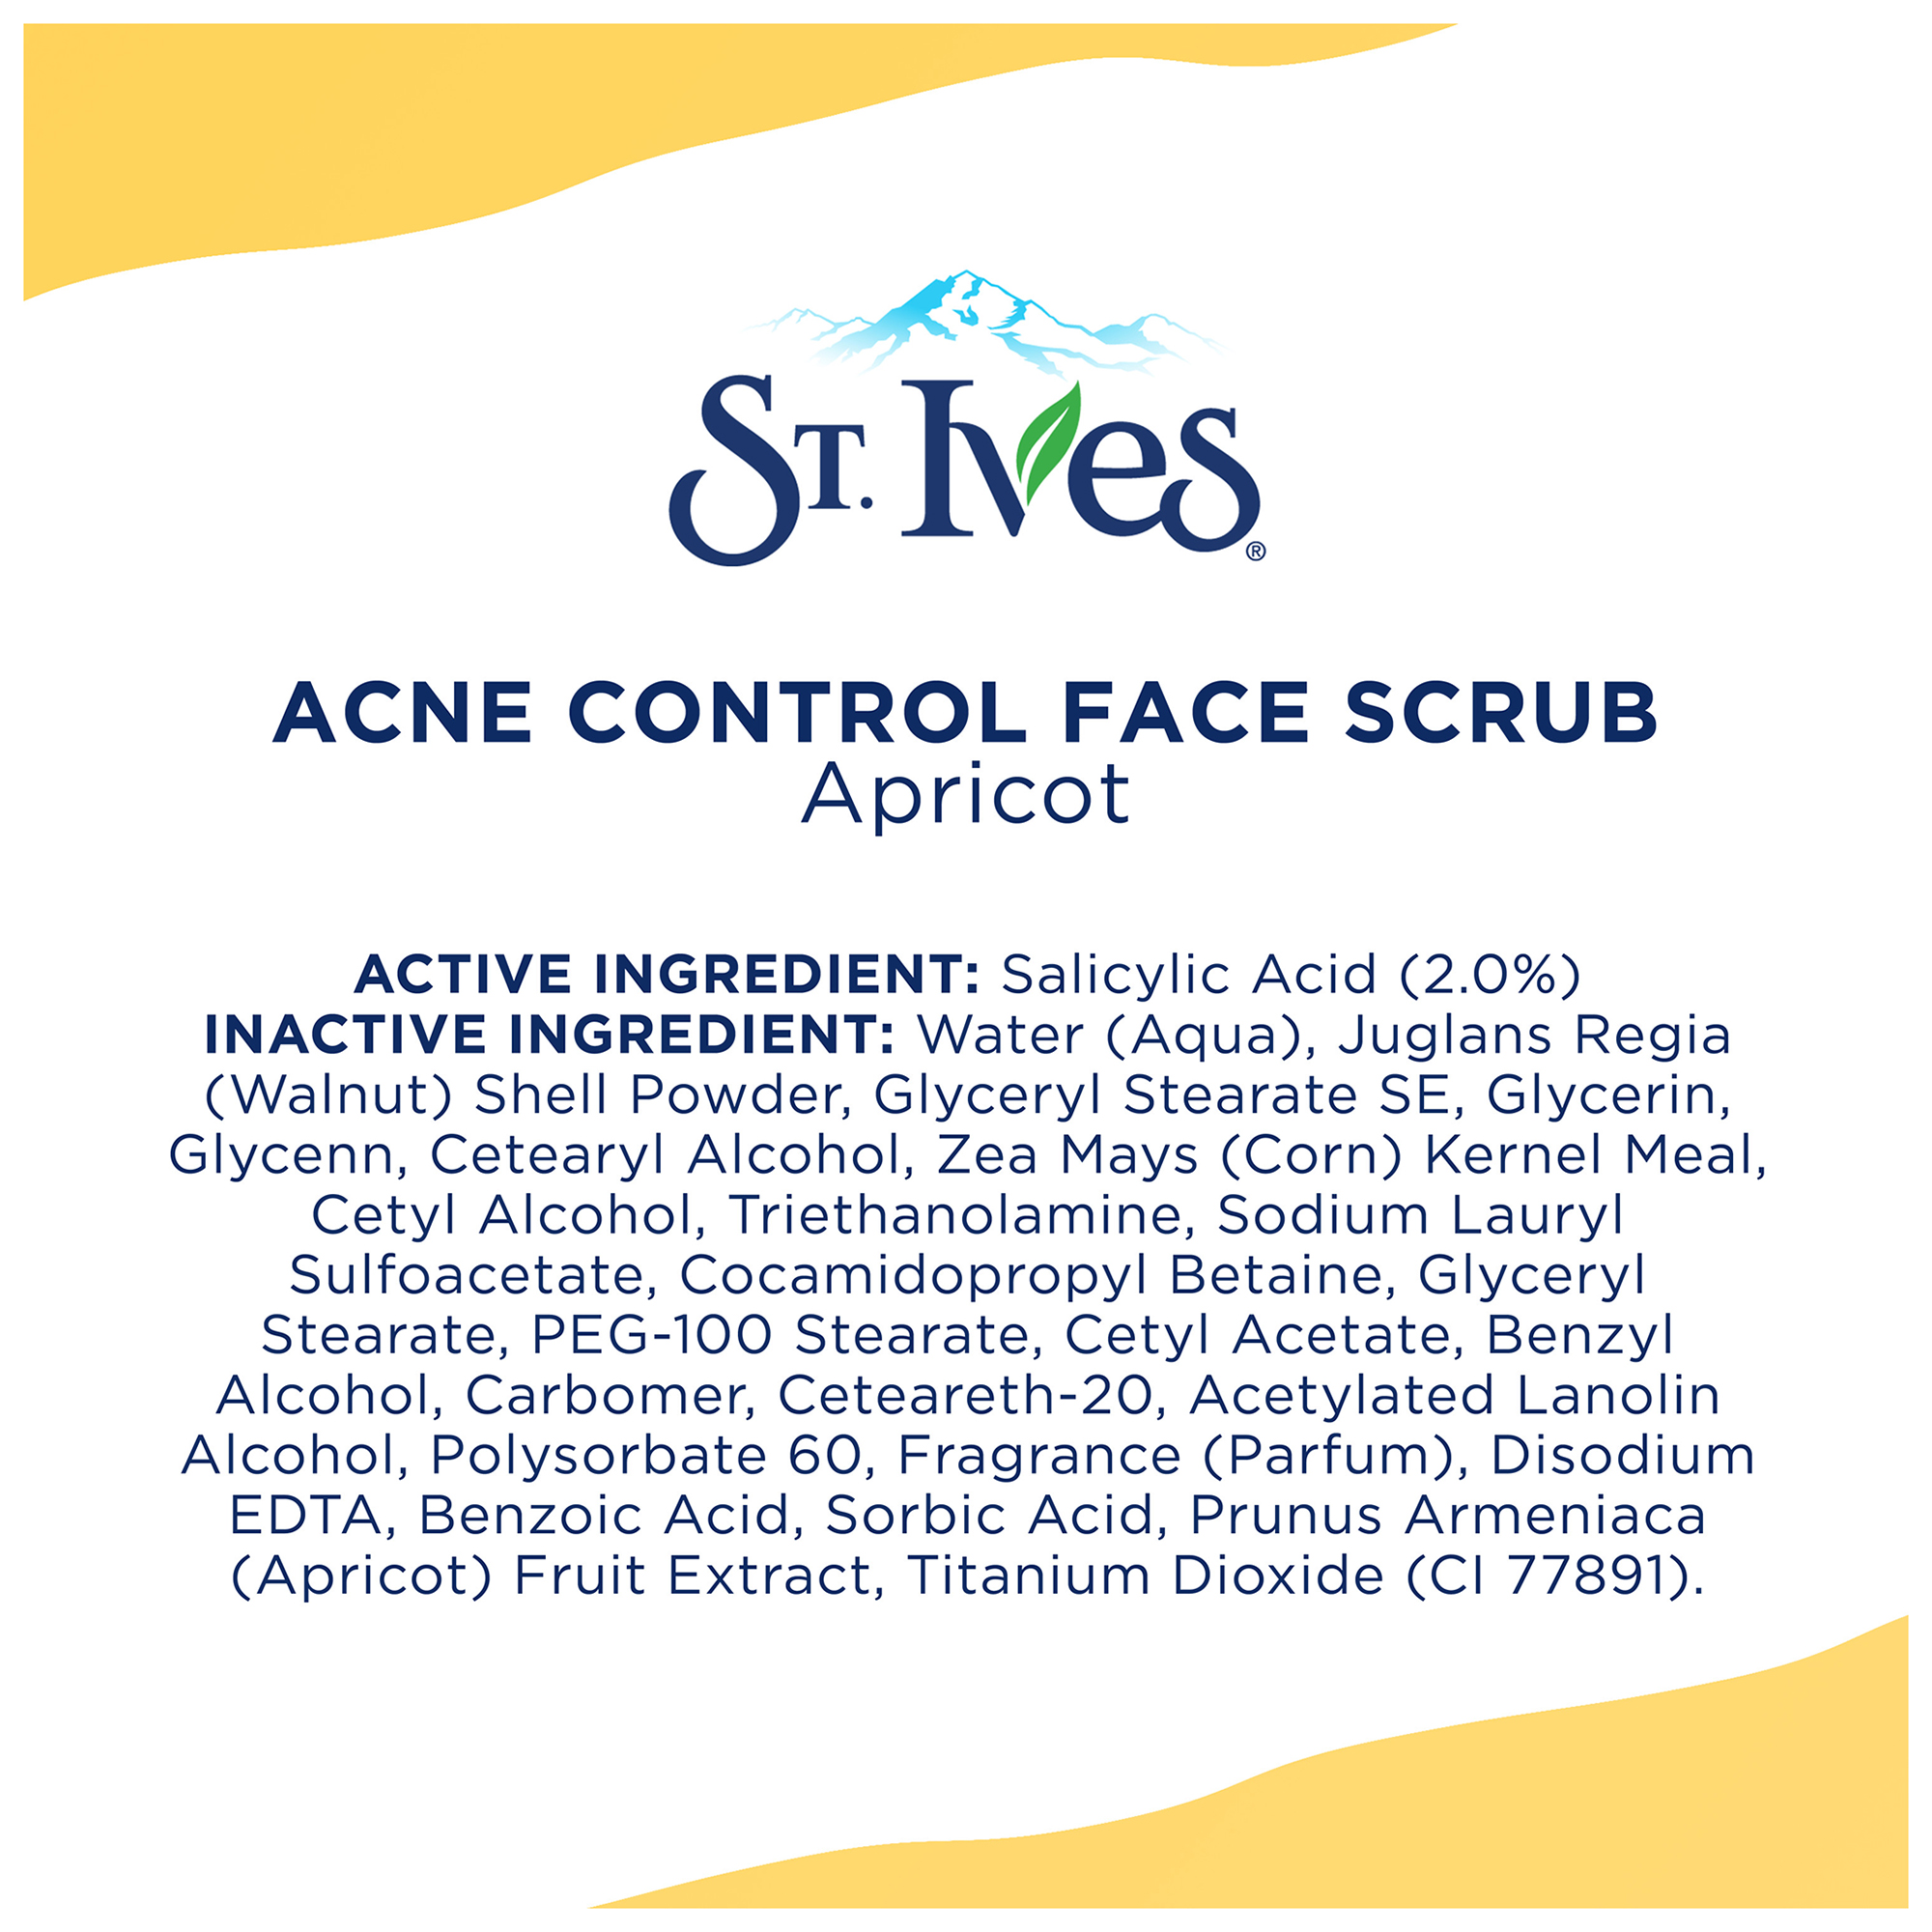 St. Ives Acne Control Apricot Face Scrub, 6 oz - image 12 of 13